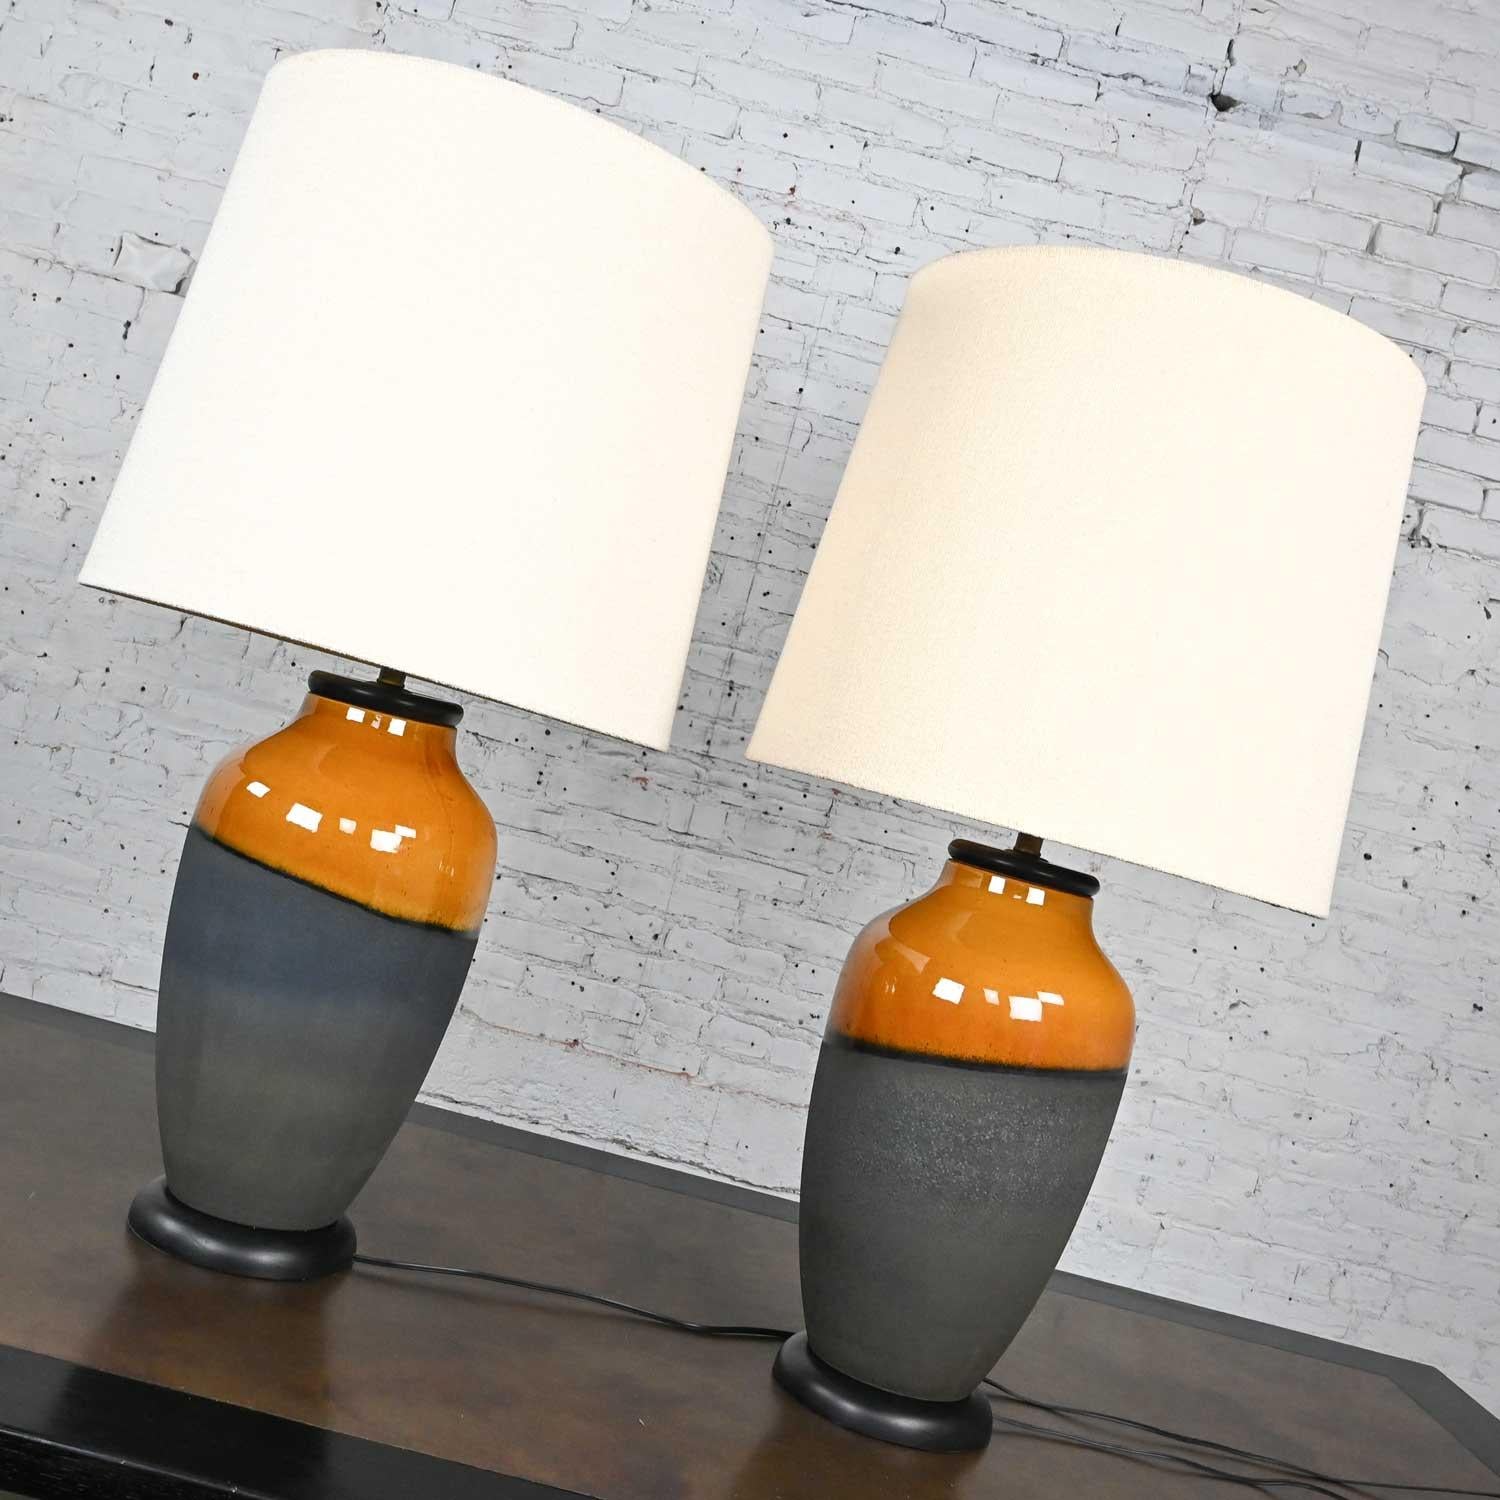 Stunning vintage mid-century modern black matte and gold asymmetrical glazed design floor vase style large scale table lamps with off-white linen-look hard backed drum shades and round wood bases by Carstens Tonnieshof Germany. Beautiful condition,